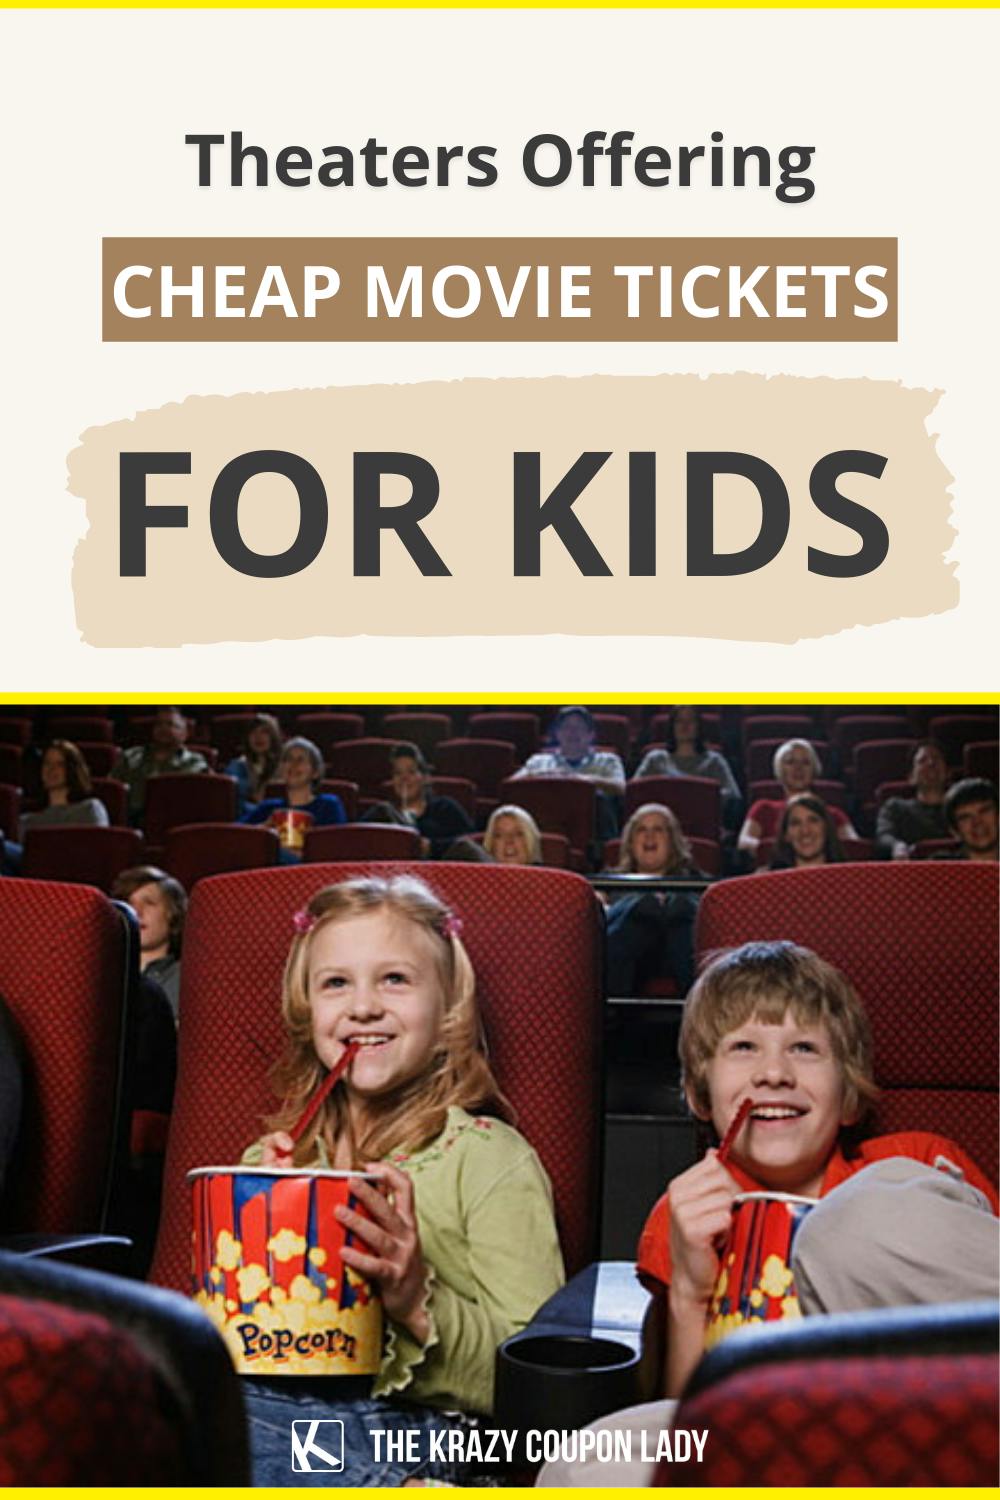 8 Theaters Offering Cheap Movie Tickets for Kids in 2022